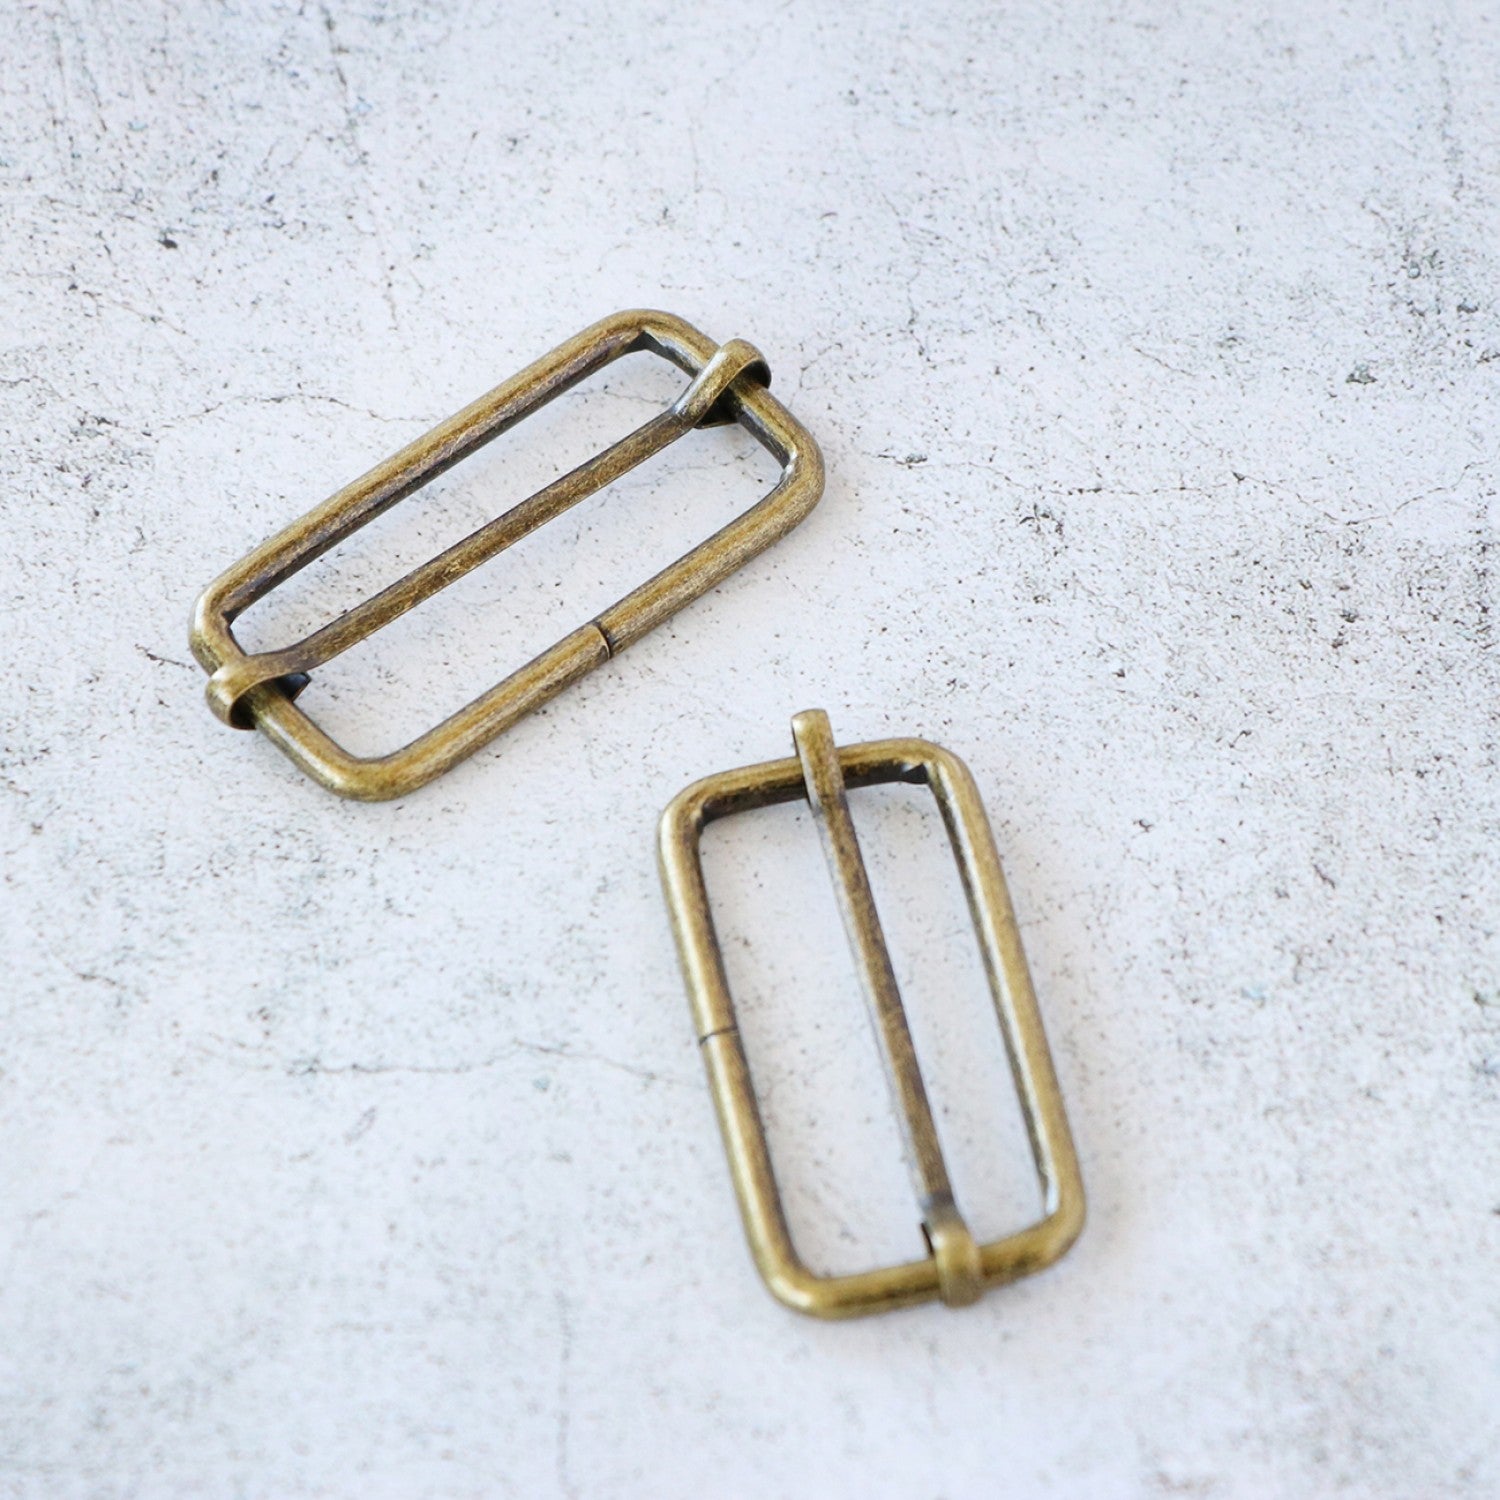 Two Slider Buckles 2"